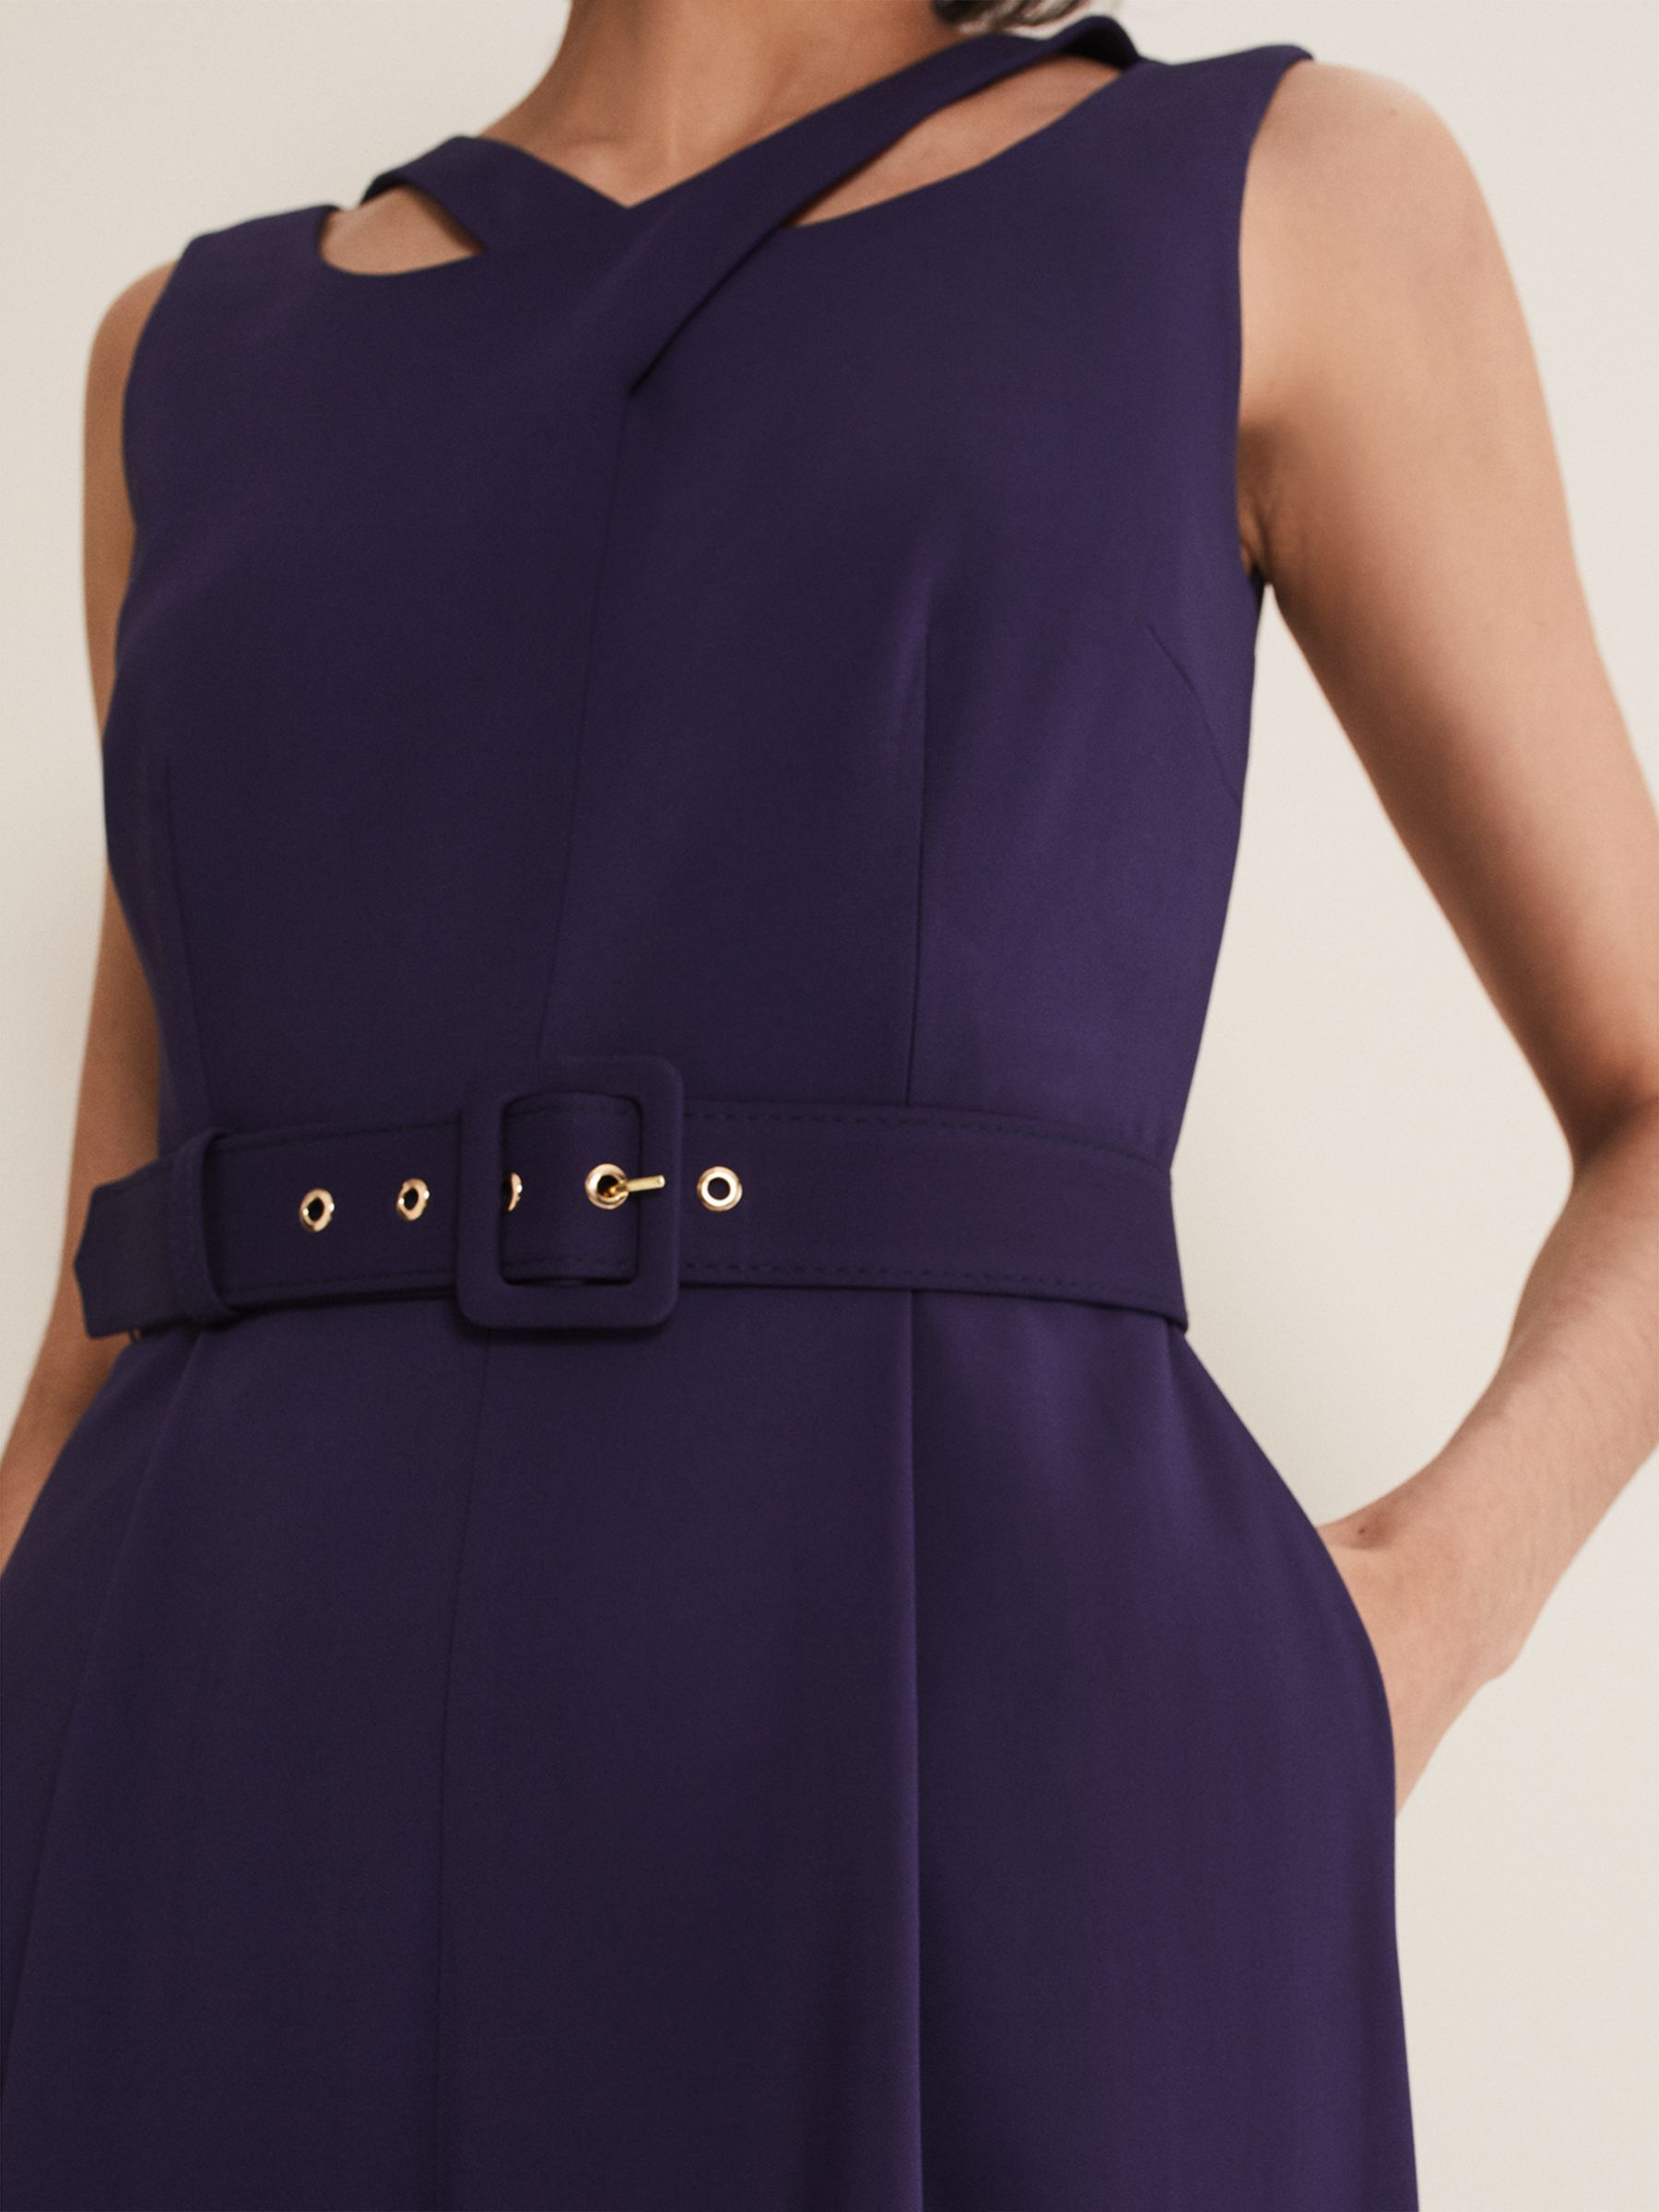 Buy Phase Eight Anna Cutout Belted Jumpsuit, Ink Online at johnlewis.com